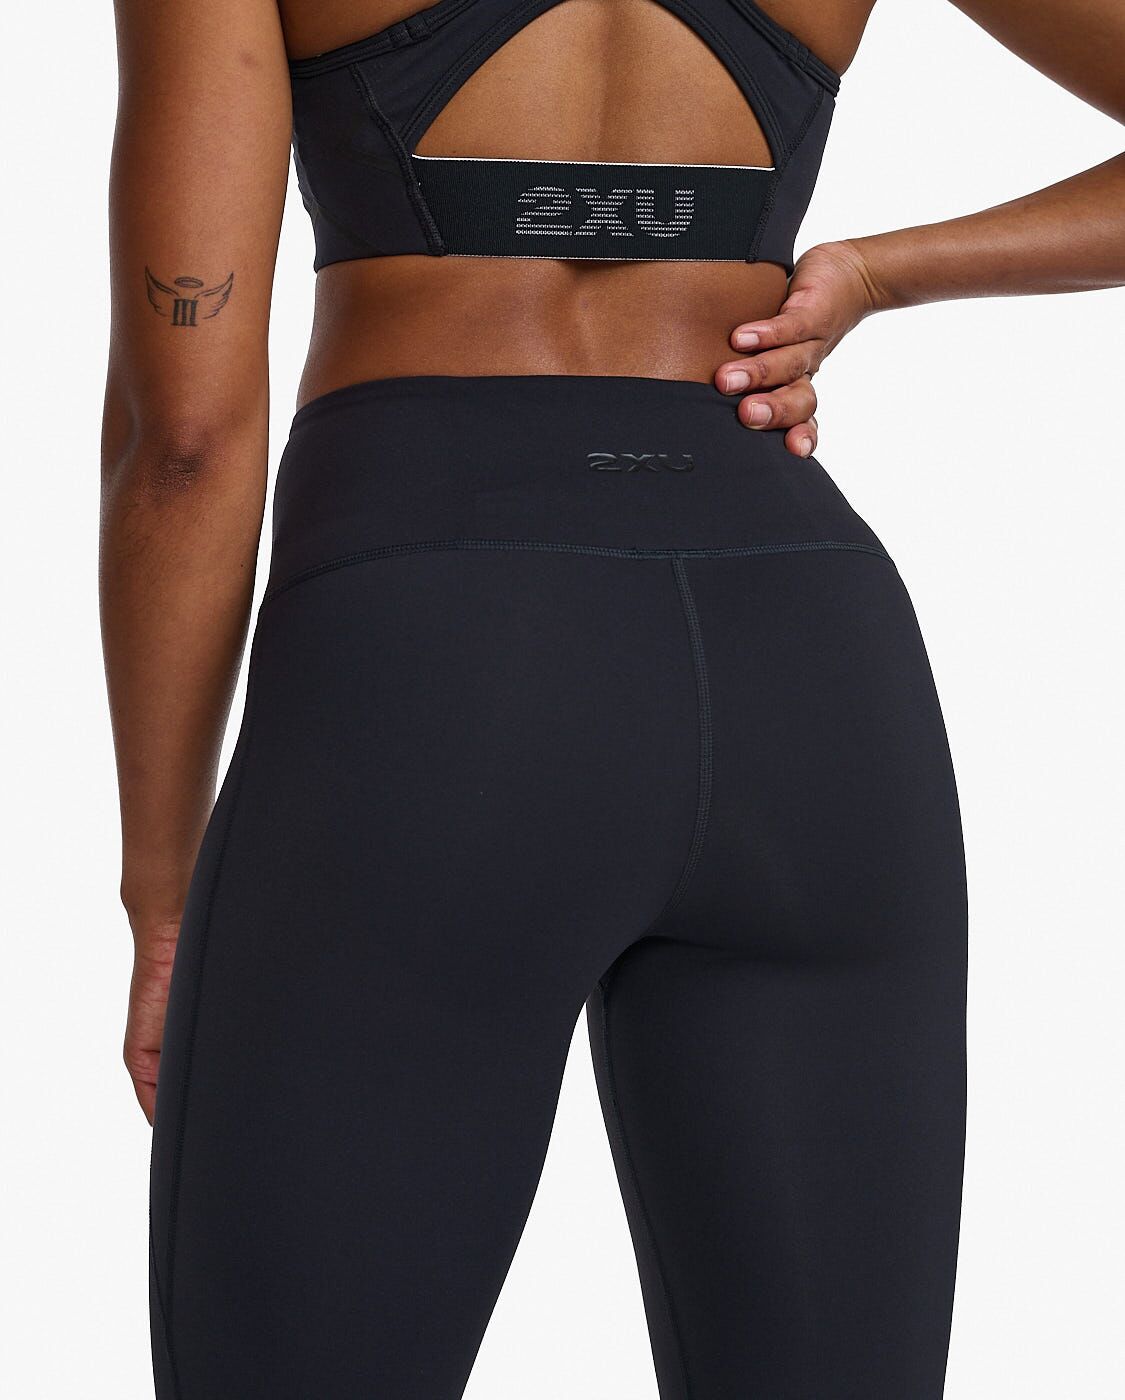 2XU South Africa - Womens Form Hi-Rise Comp 7/8 Tight - BLK/BLK